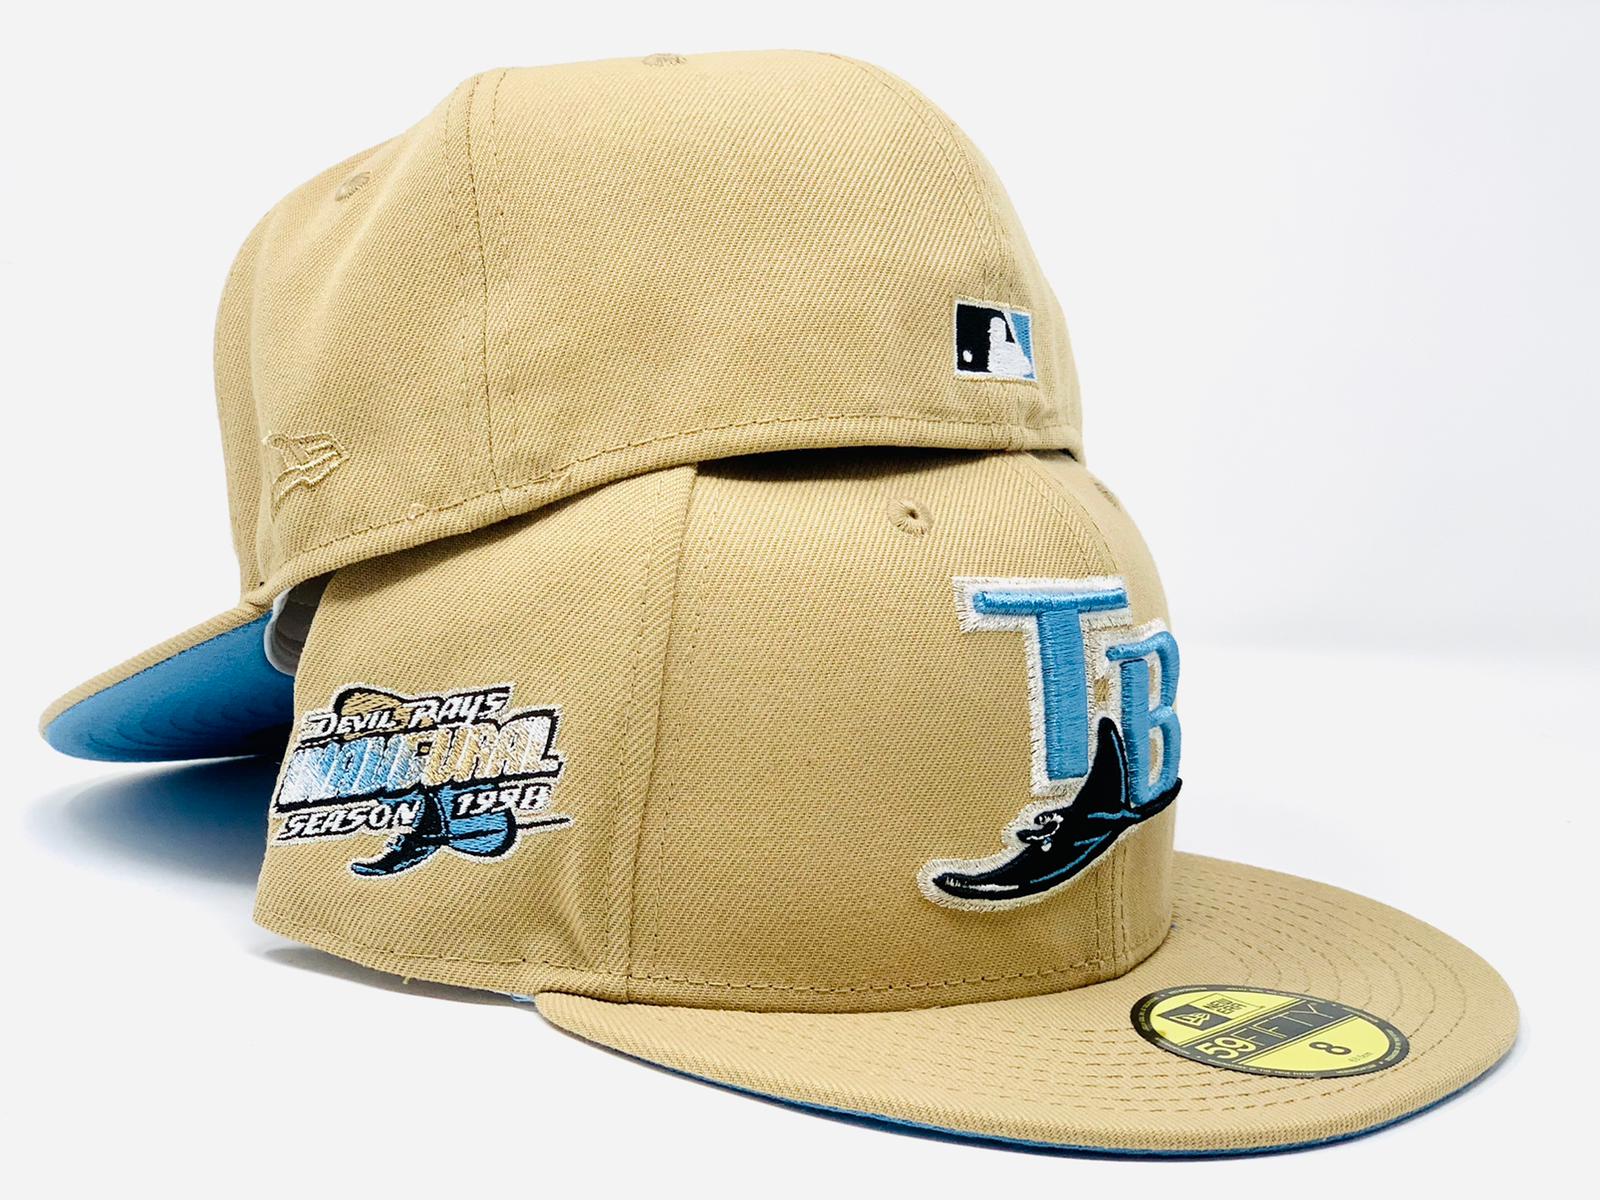 Tampa Bay Devil Rays Vintage 90s Twins Enterprise Snapback Cap Hat - N –  thecapwizard